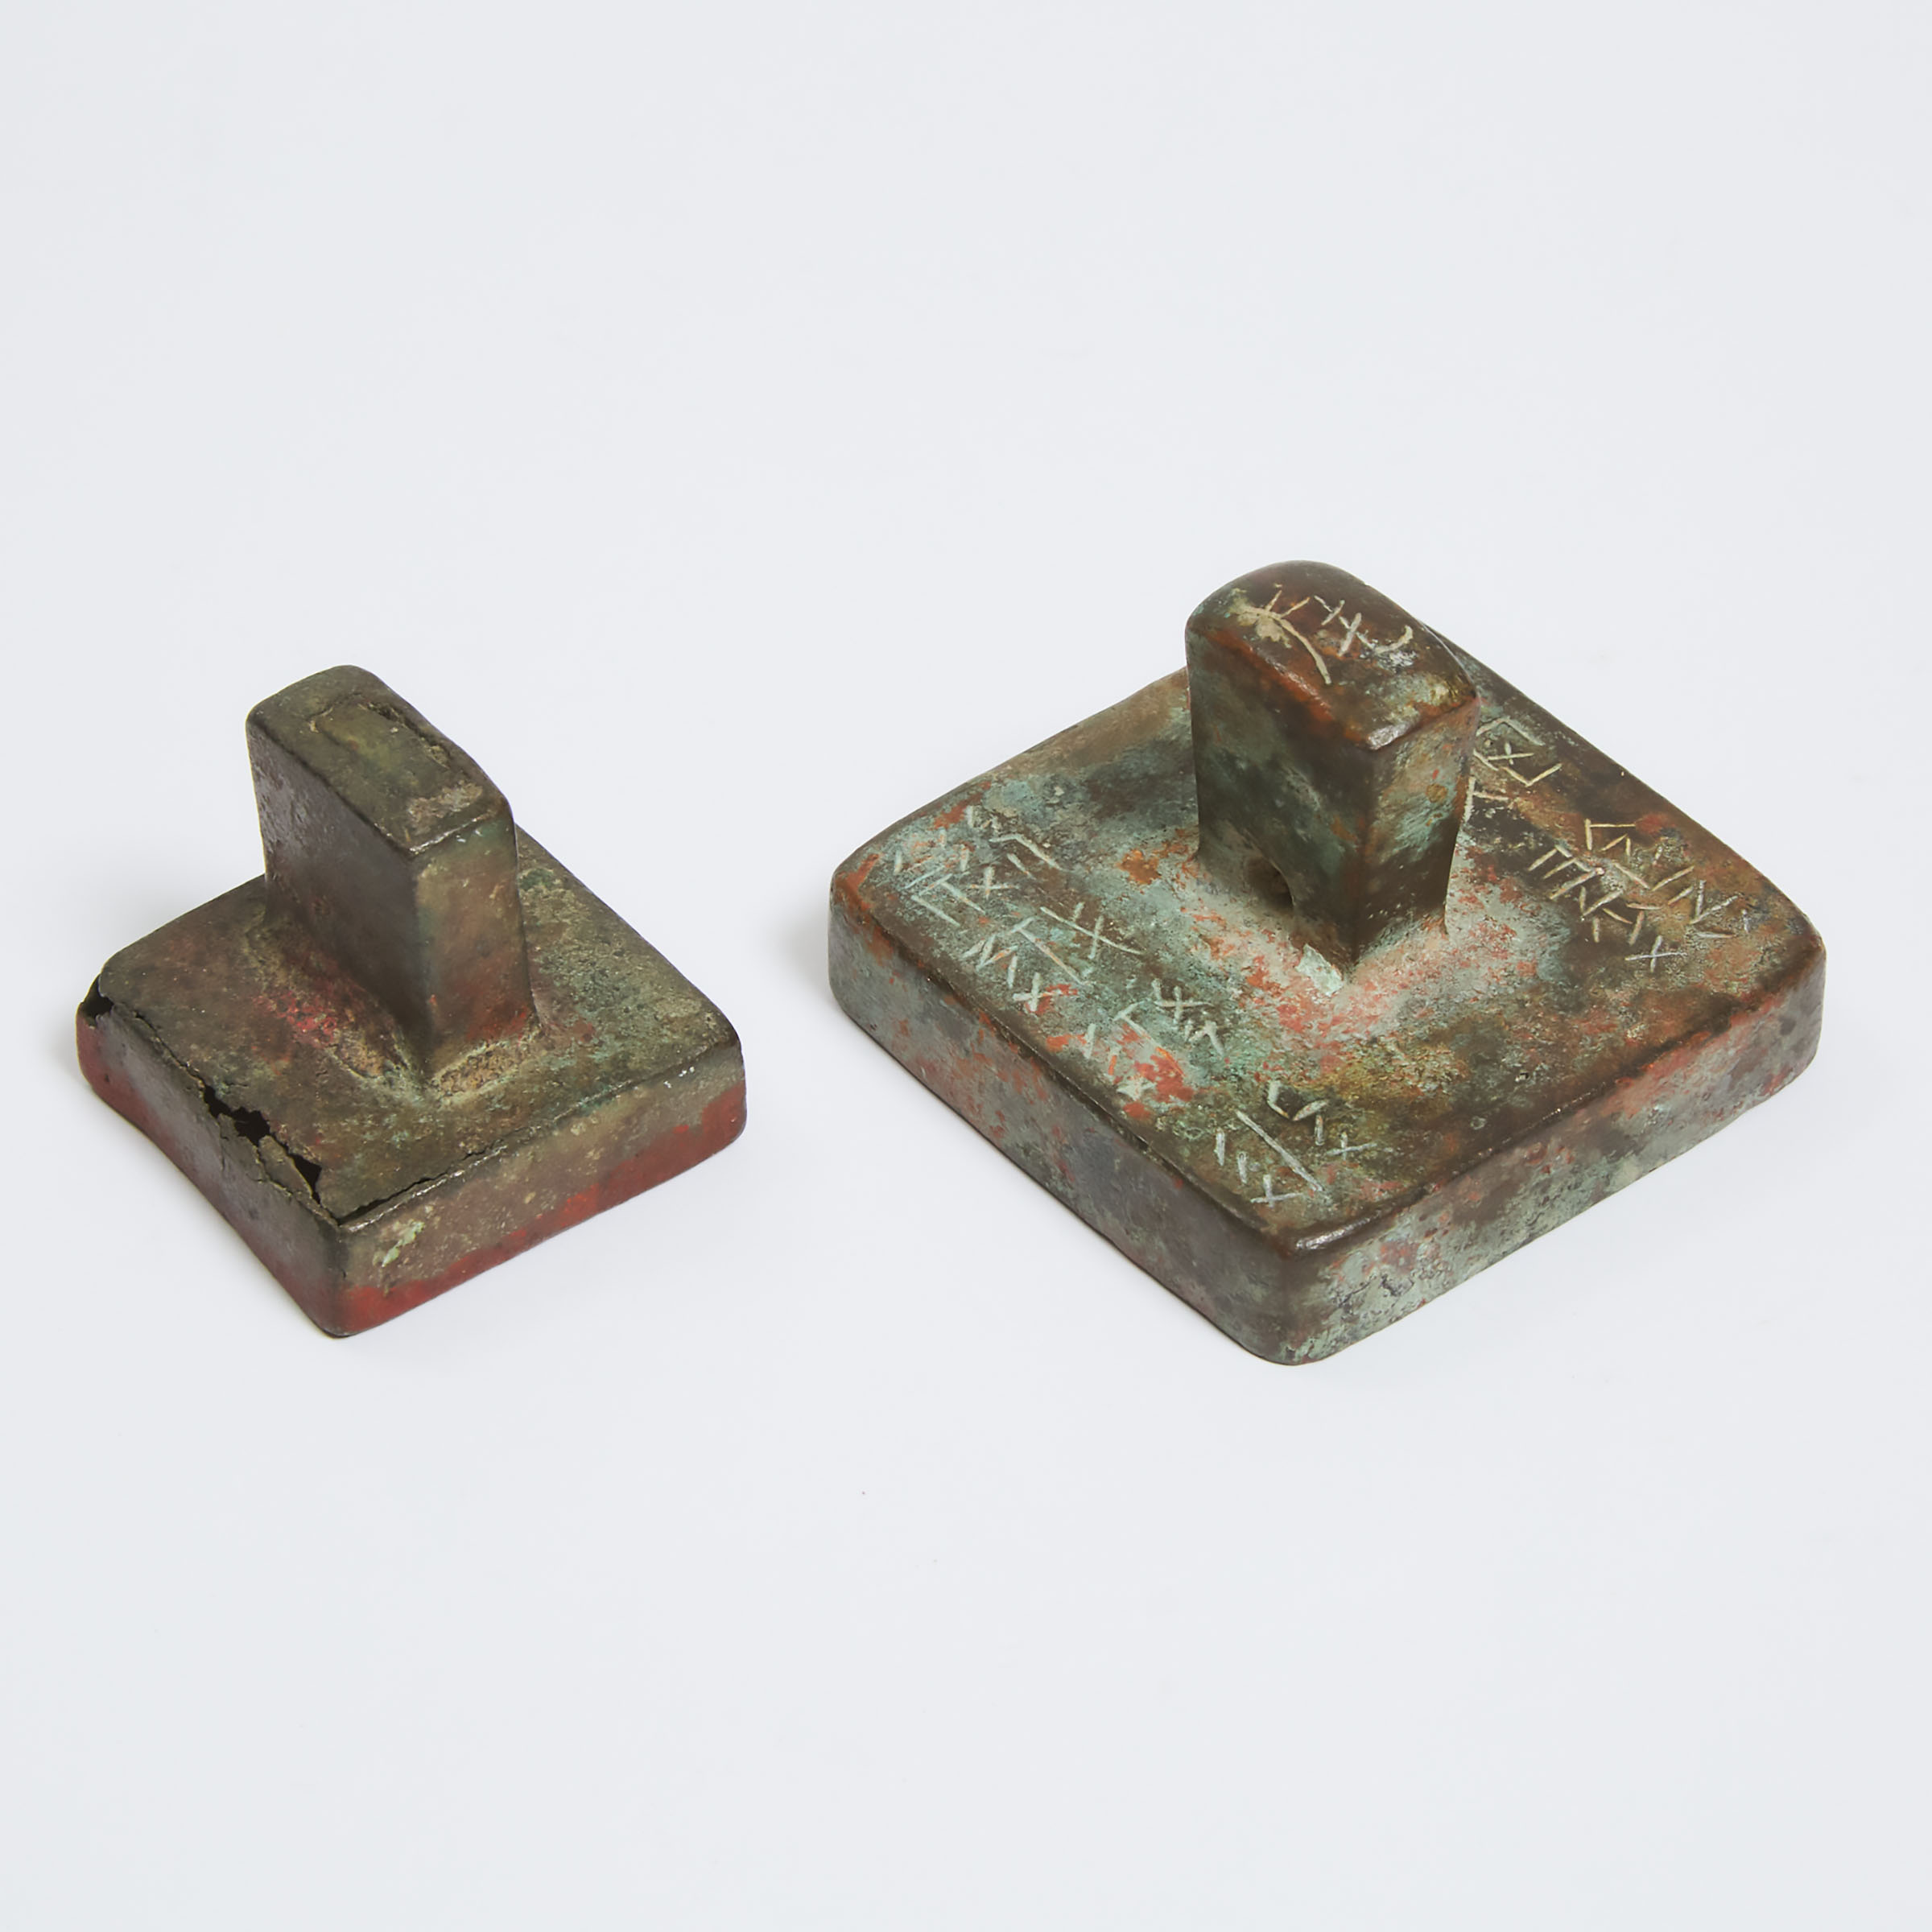 Two Chinese Bronze Seals, Ming Dynasty (1368-1644)